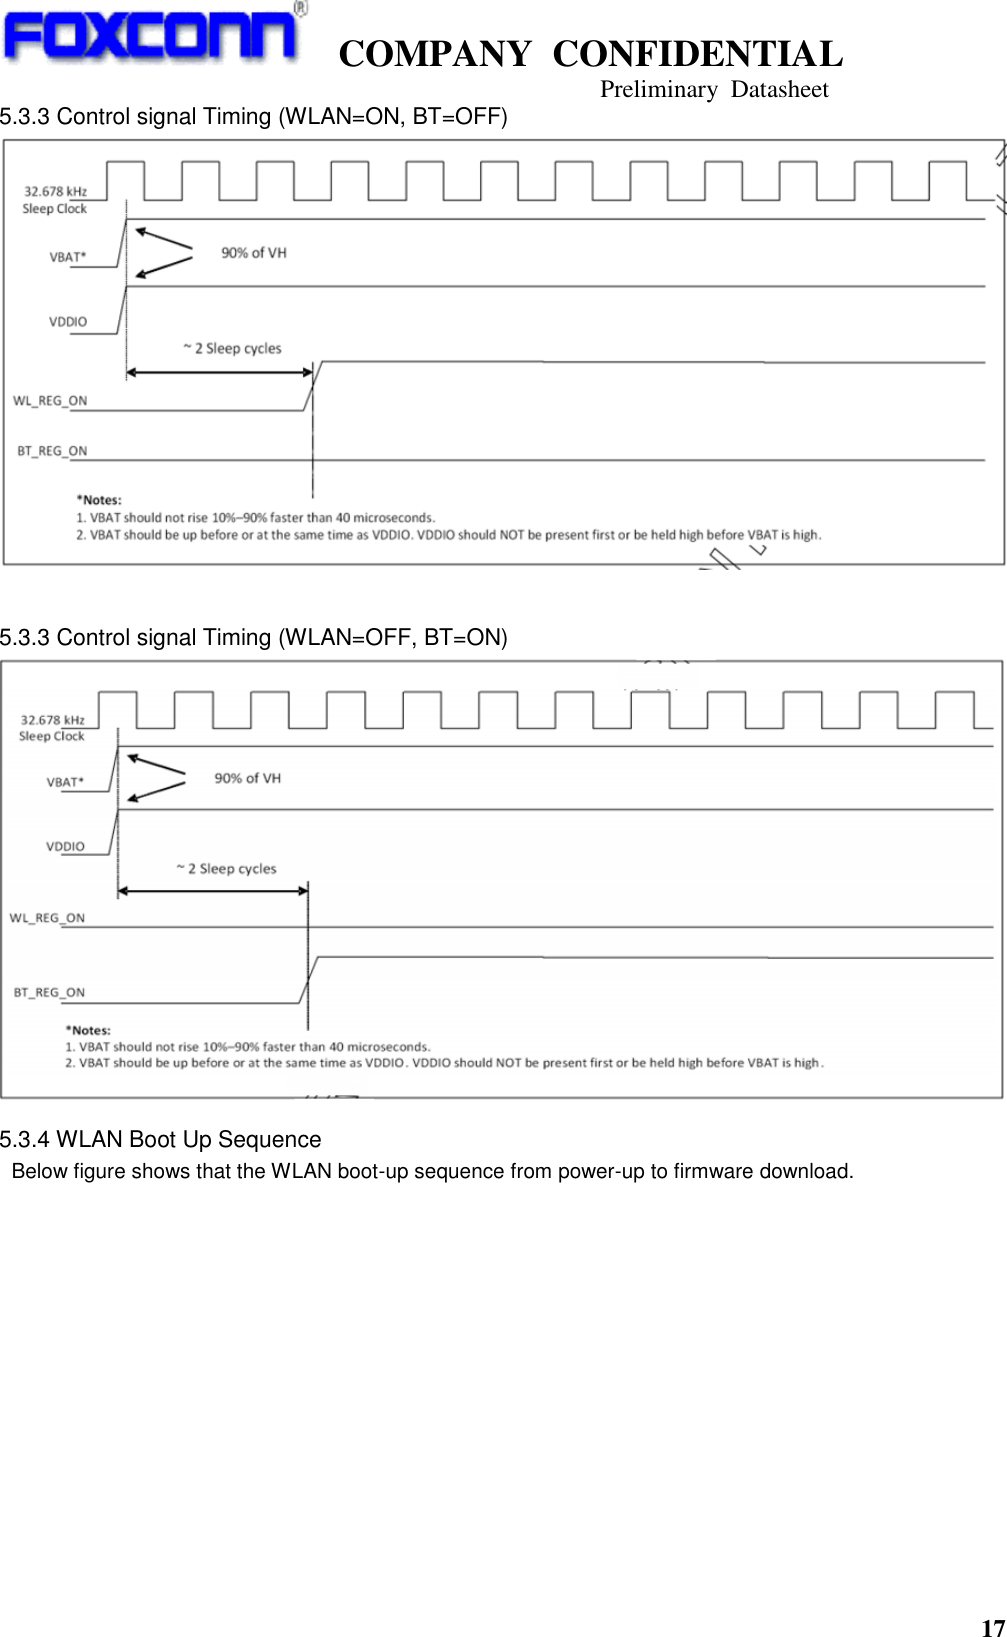   COMPANY  CONFIDENTIAL                                   Preliminary  Datasheet 17  5.3.3 Control signal Timing (WLAN=ON, BT=OFF)   5.3.3 Control signal Timing (WLAN=OFF, BT=ON)  5.3.4 WLAN Boot Up Sequence  Below figure shows that the WLAN boot-up sequence from power-up to firmware download.  